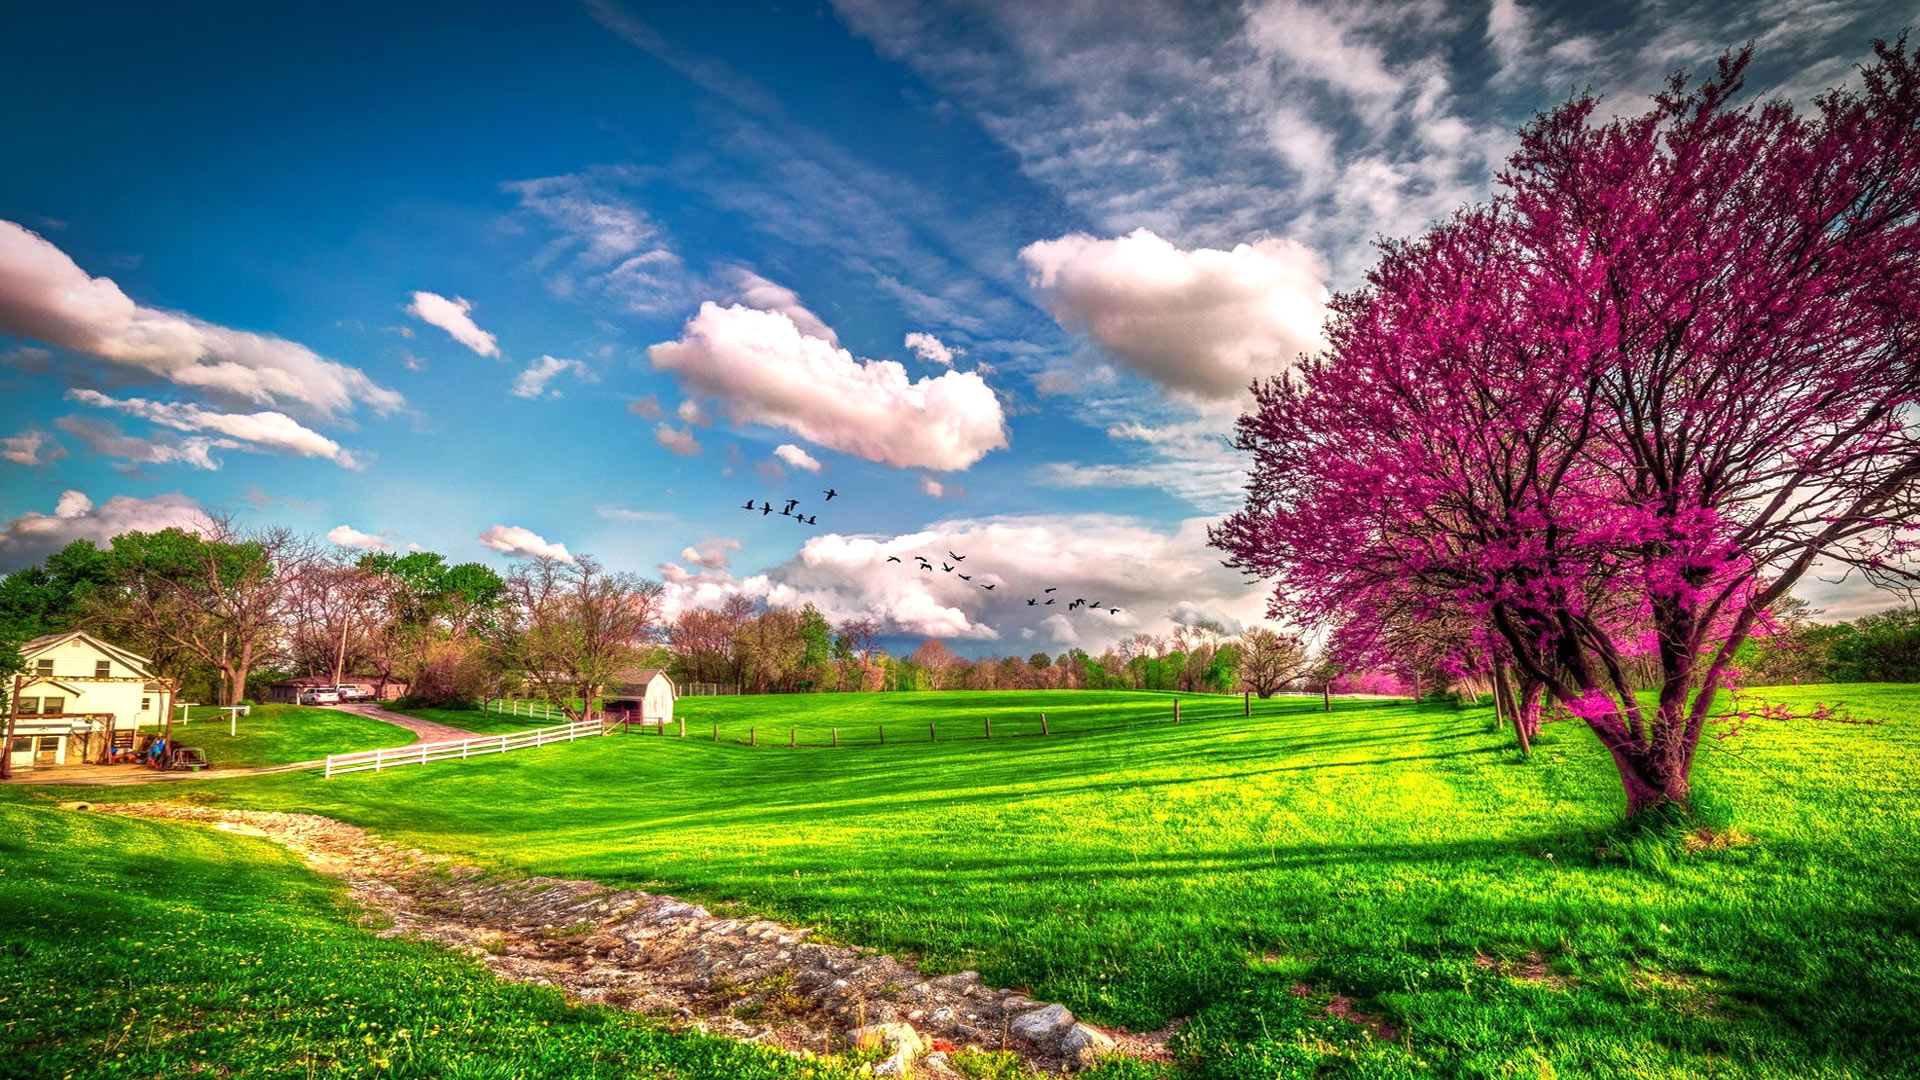 Beautiful Spring Day HD Wallpaper Background Image